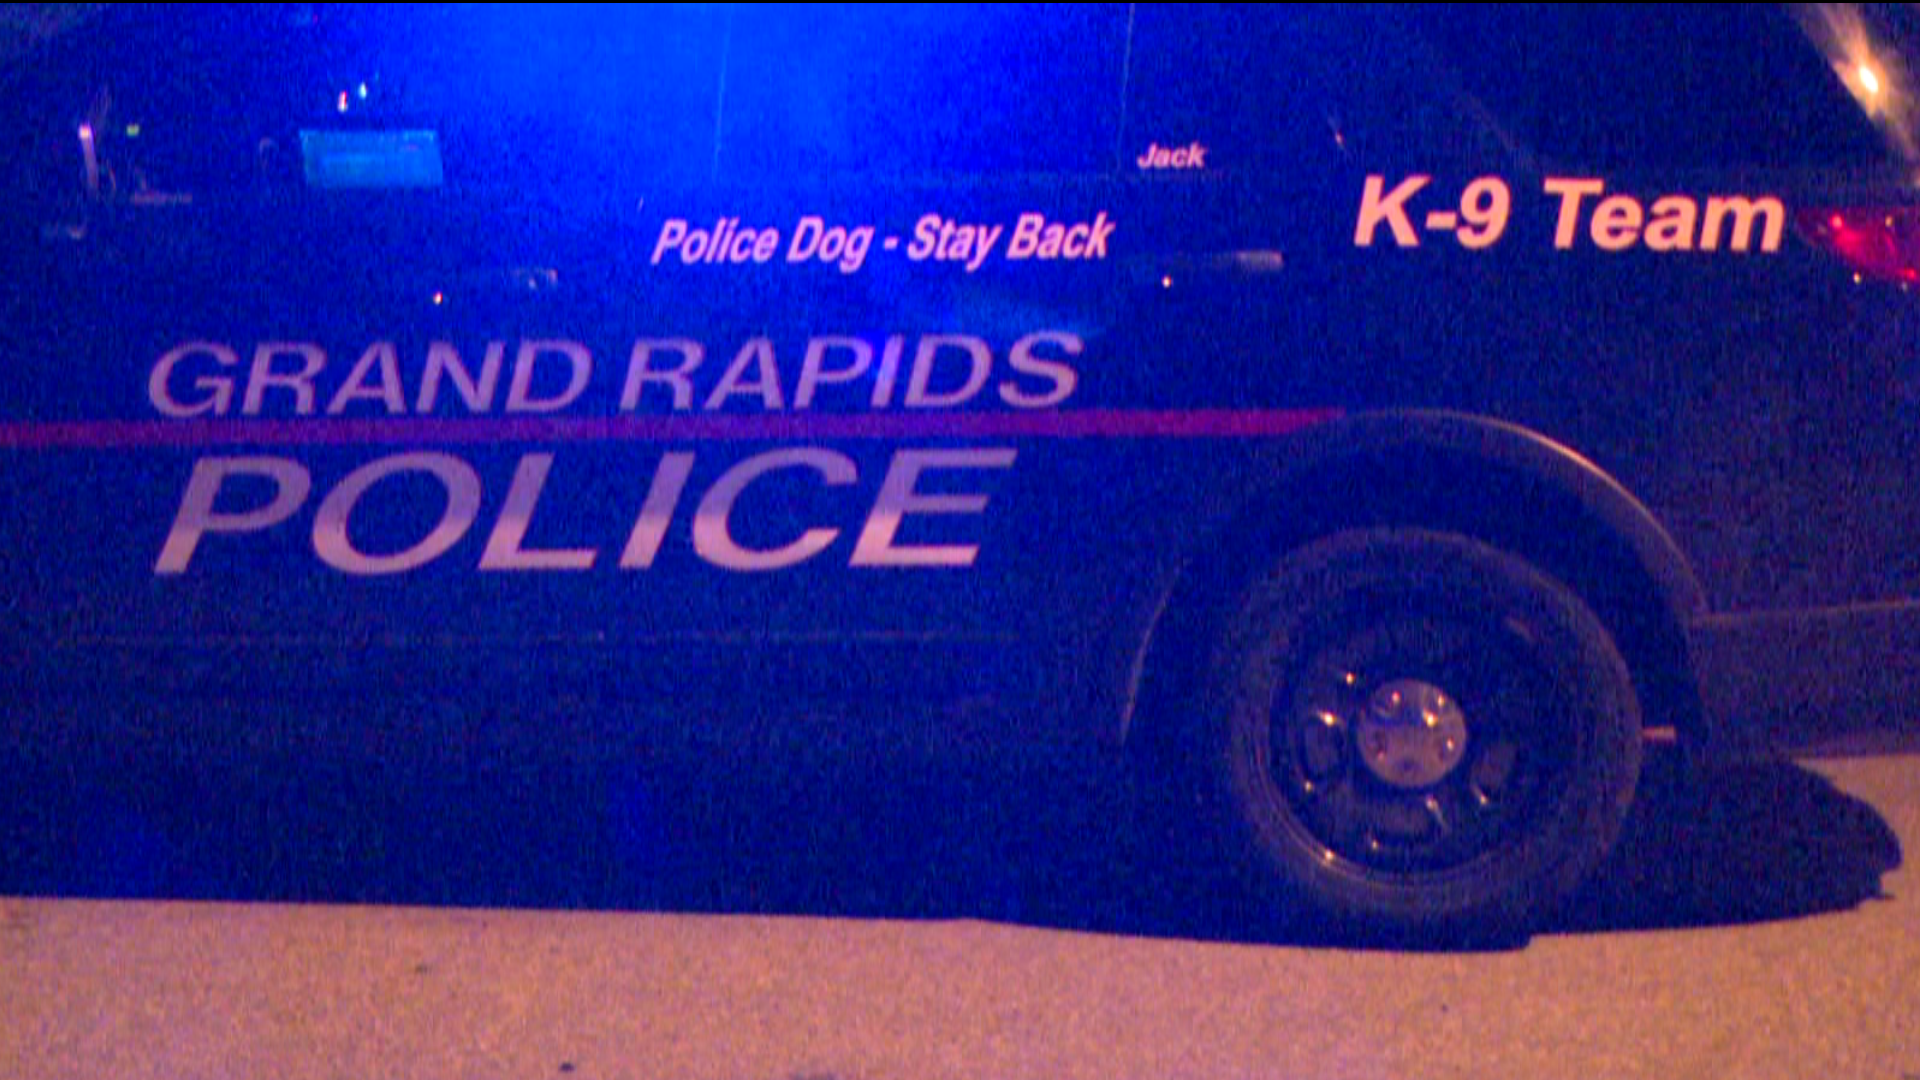 Police in Grand Rapids are investigating after a suspect broke into a party store early Tuesday morning and stole various grocery items before fleeing the scene.